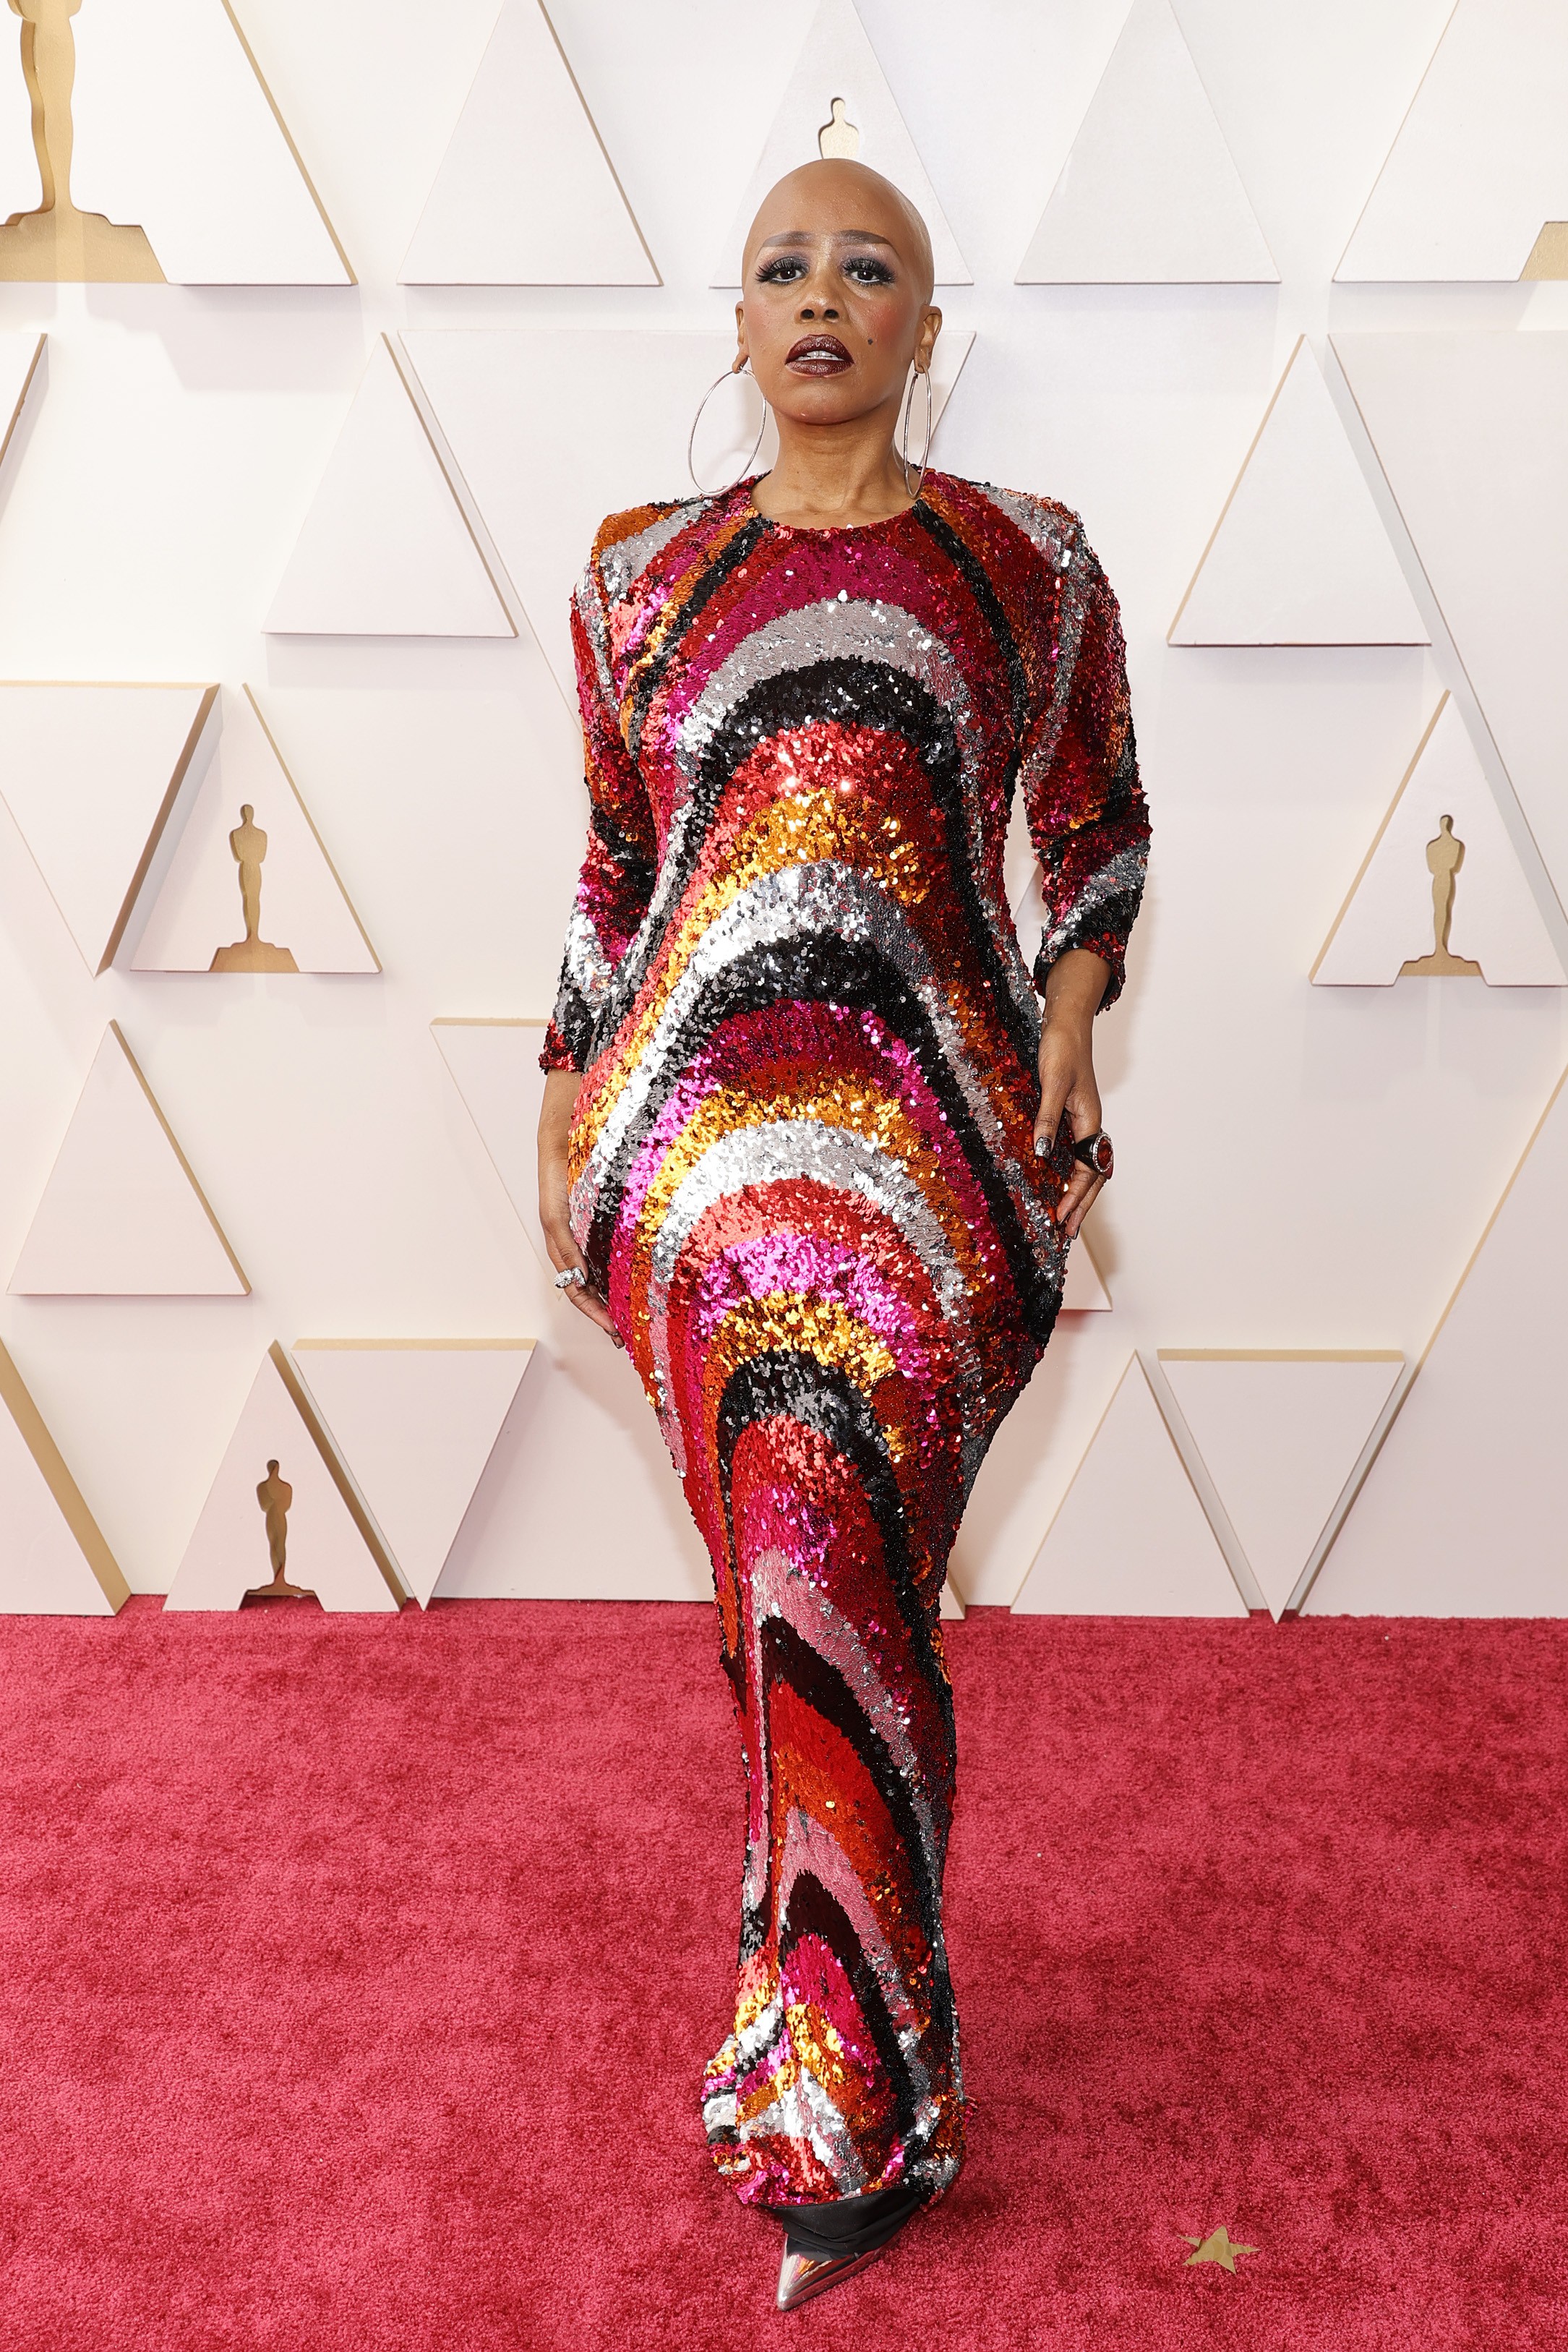 HOLLYWOOD, CALIFORNIA - MARCH 27: Tanisha Grant attends the 94th Annual Academy Awards at Hollywood and Highland on March 27, 2022 in Hollywood, California. (Photo by Mike Coppola/Getty Images) (Foto: Getty Images)